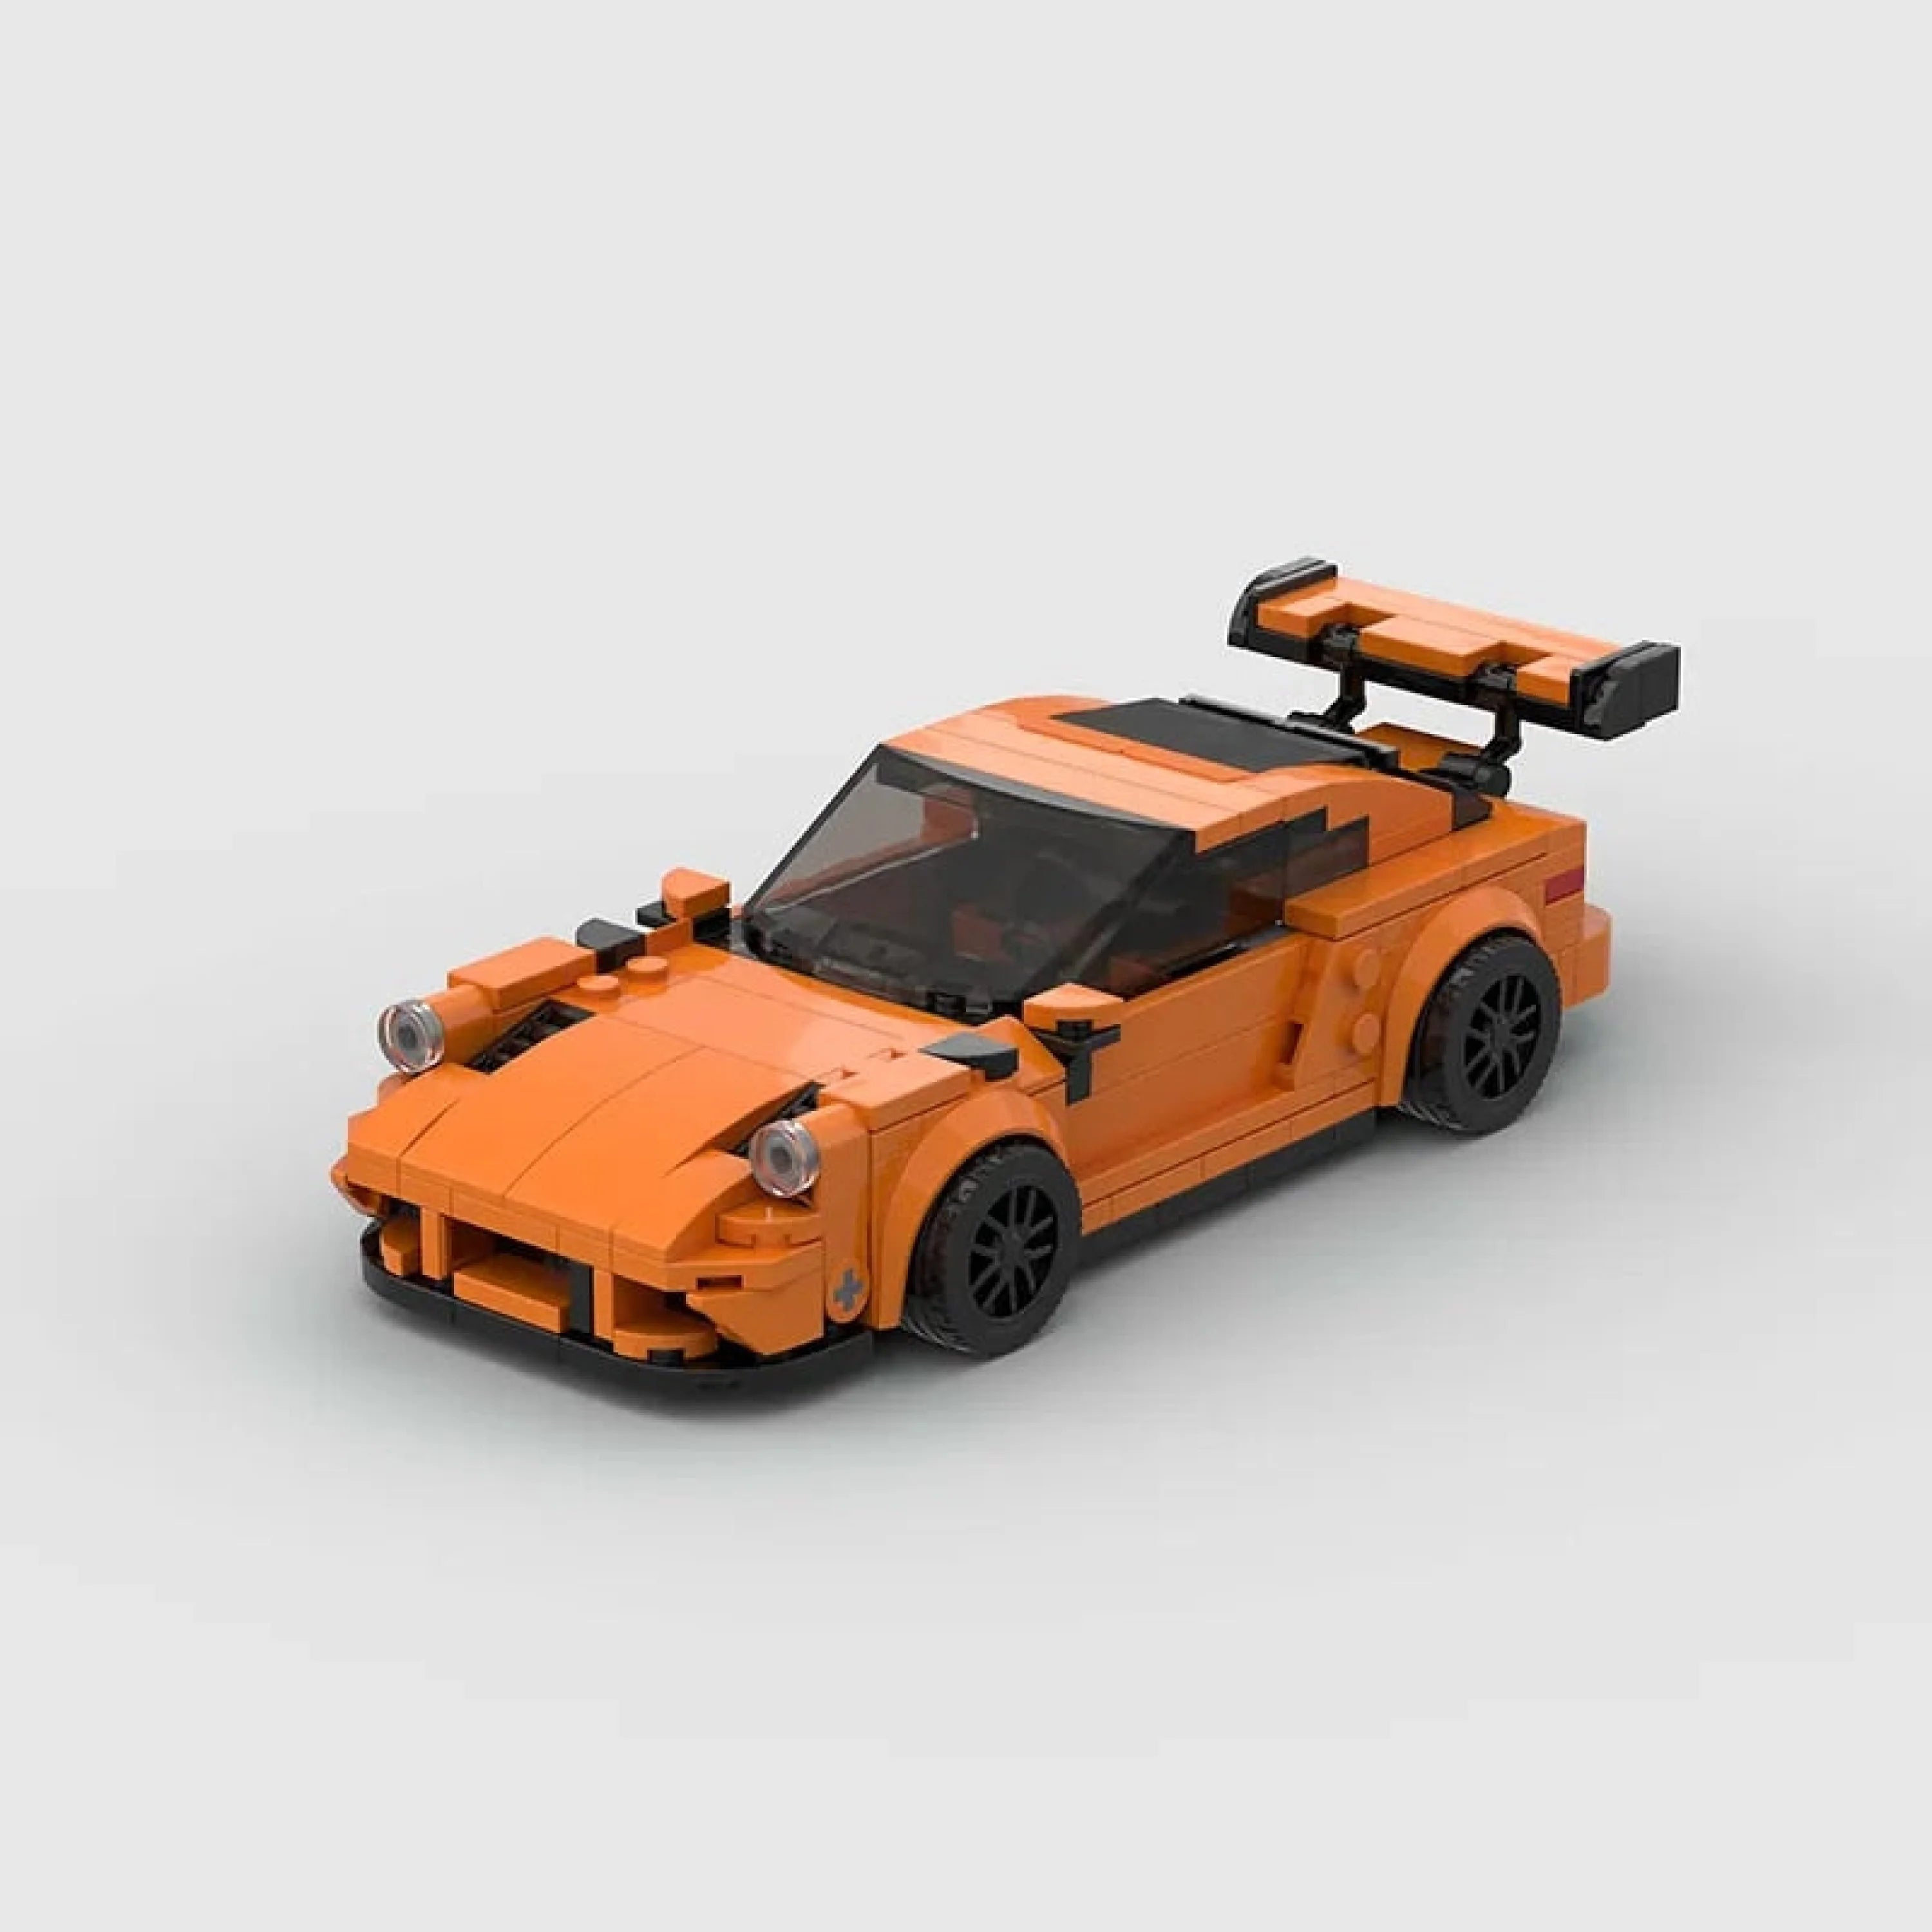 Porsche 911 GT3 RS made from lego building blocks